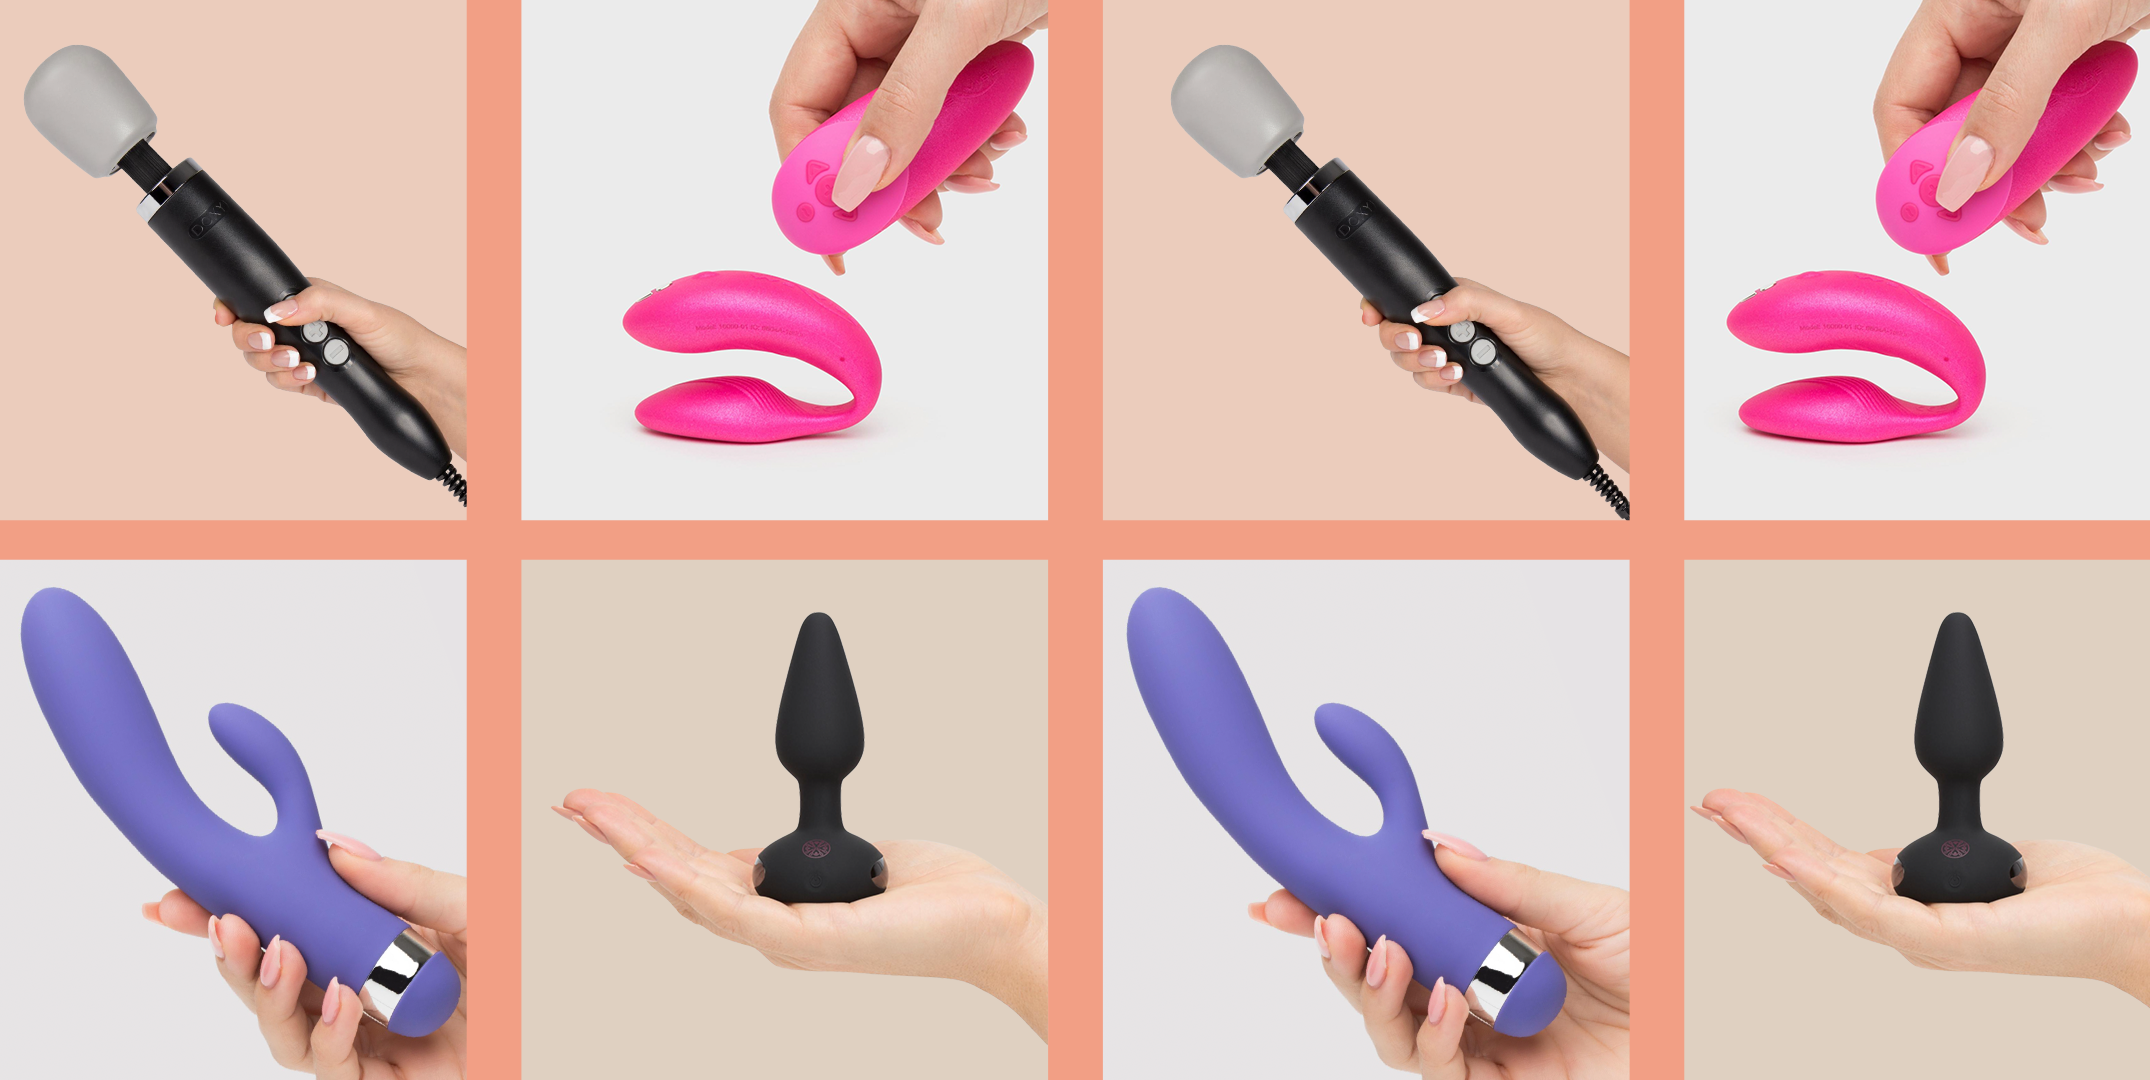 Head To Head Sex Toy - How to Use 7 Most Common Vibrators - List of Vibrators